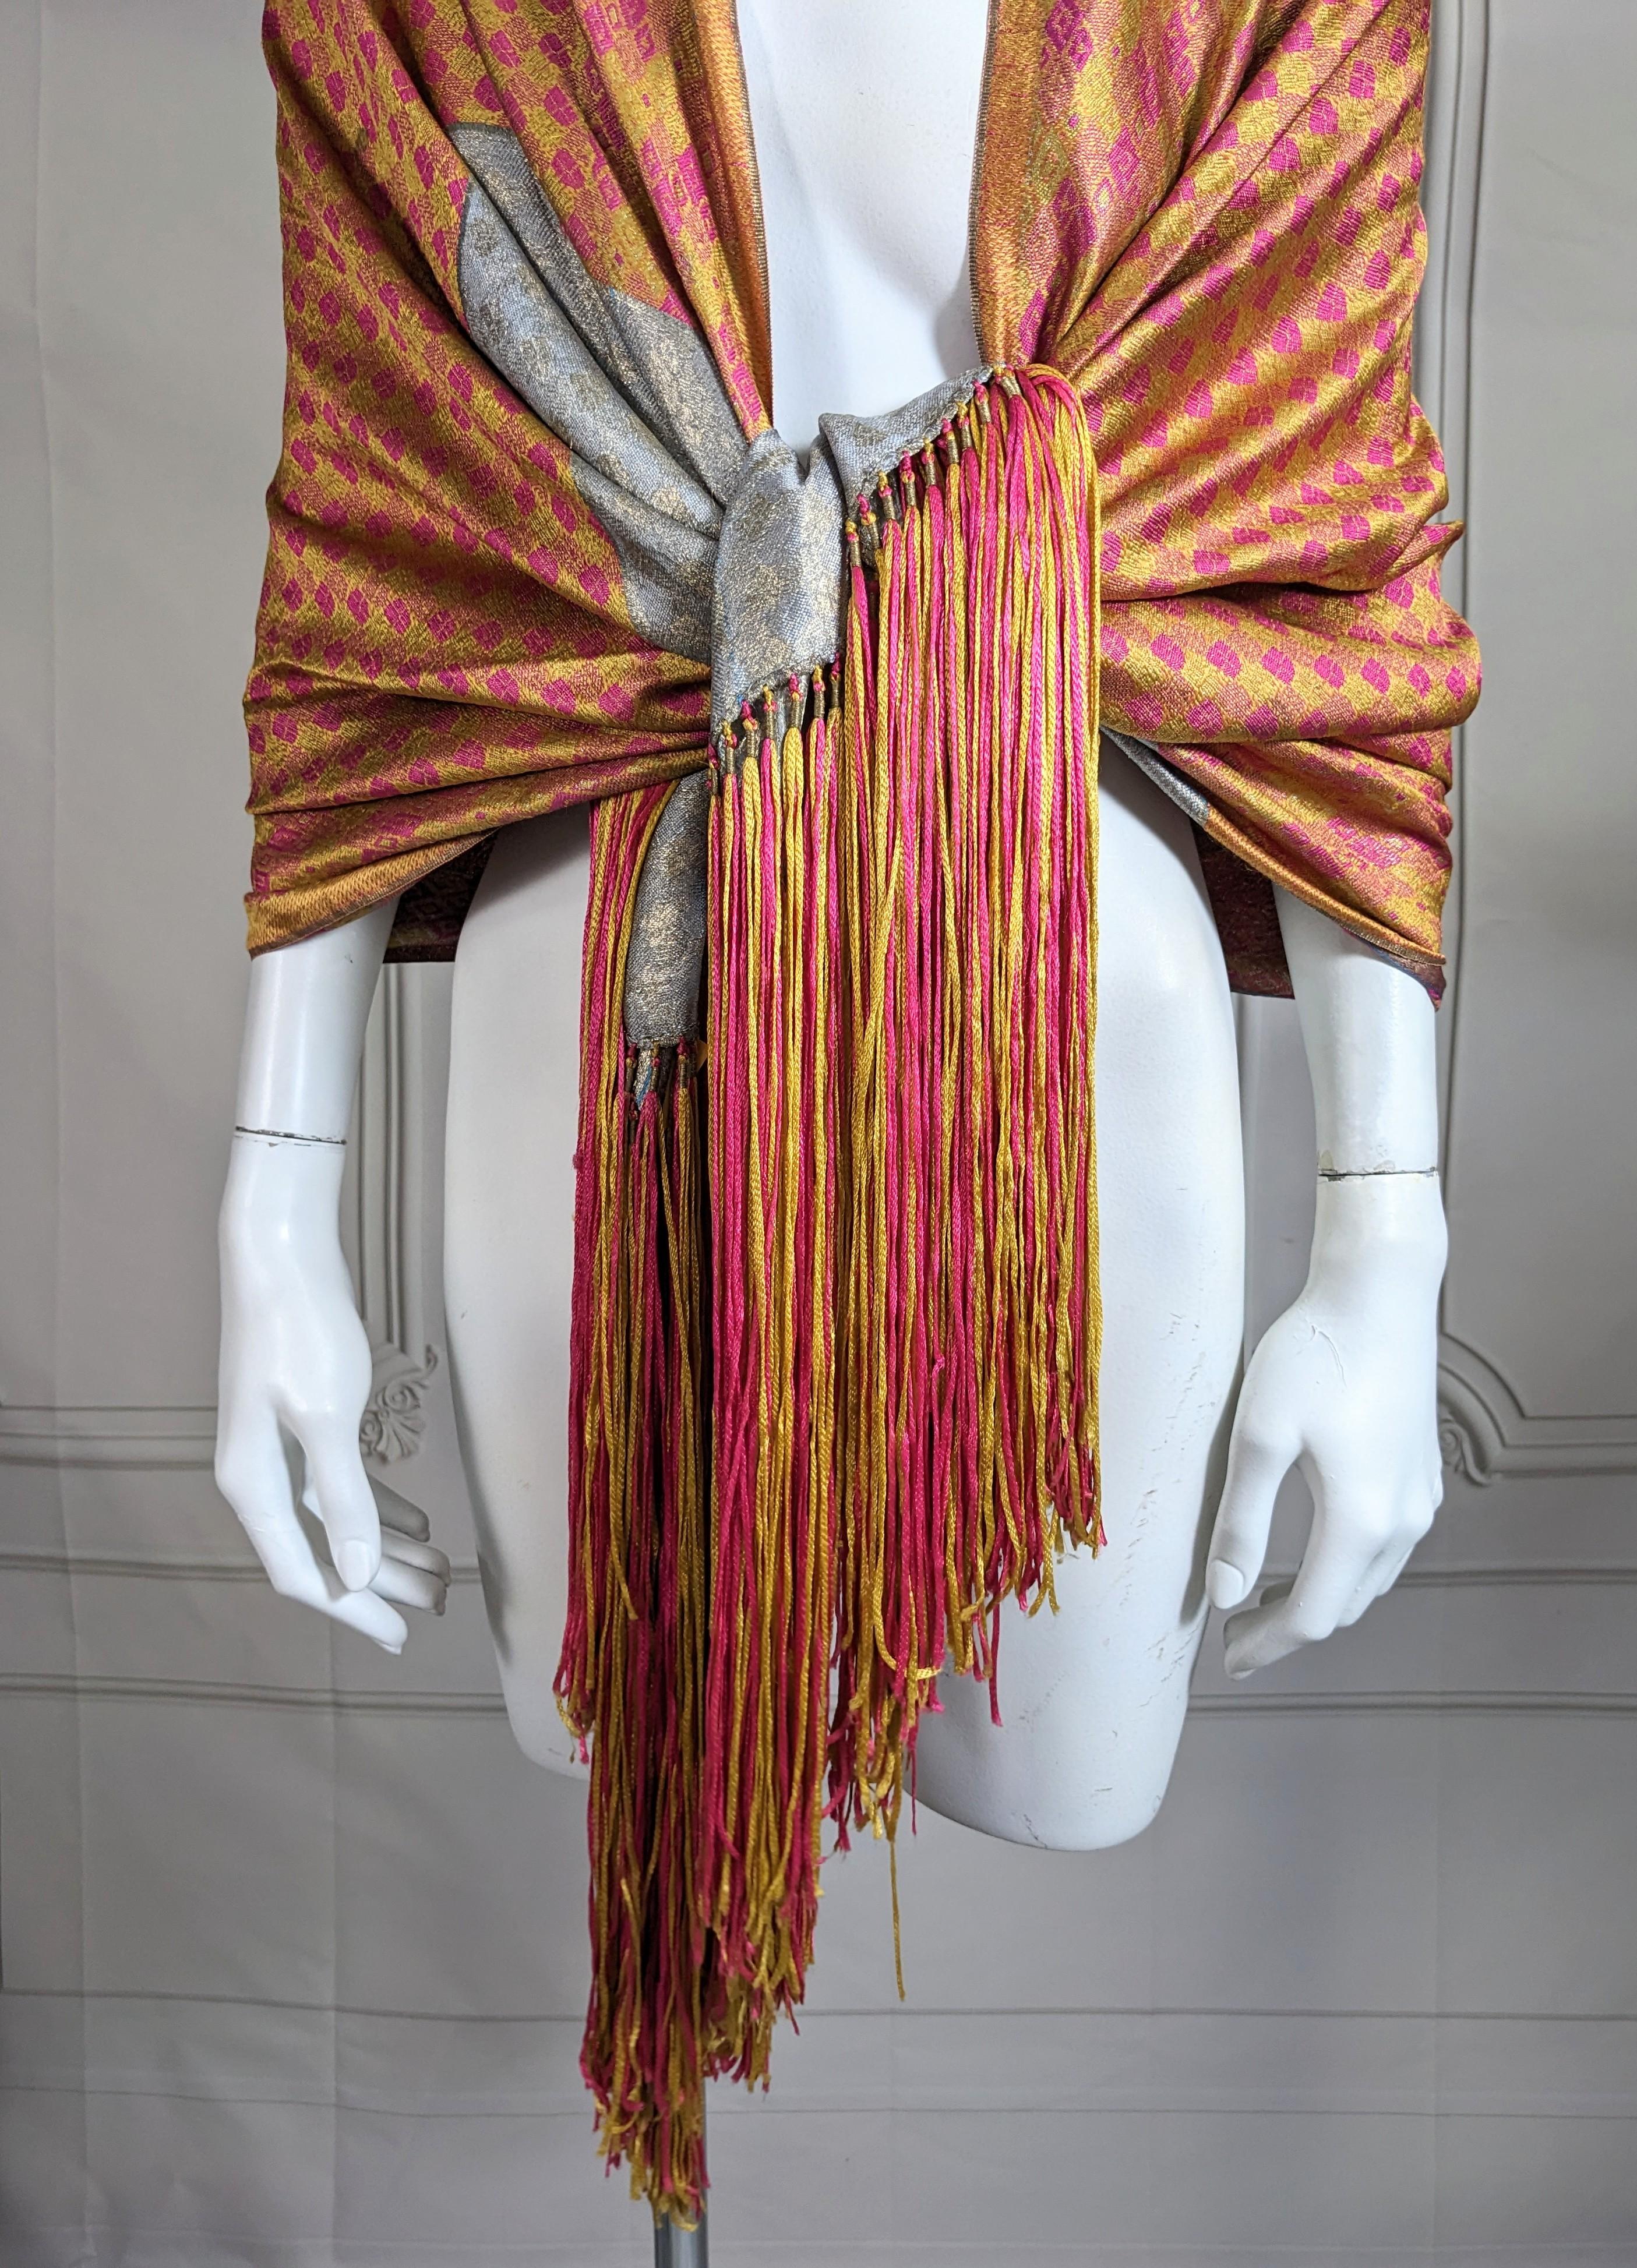 Lovely Art Deco Lame Orientalist Motif Shawl from the 1920's. In tones of rasberry, yellow, orange, gold and silver gilt turquoise with long silk knitted fringe in fuschia and gold silk. Gold and silver patinaed metallic overtones throughout. 30